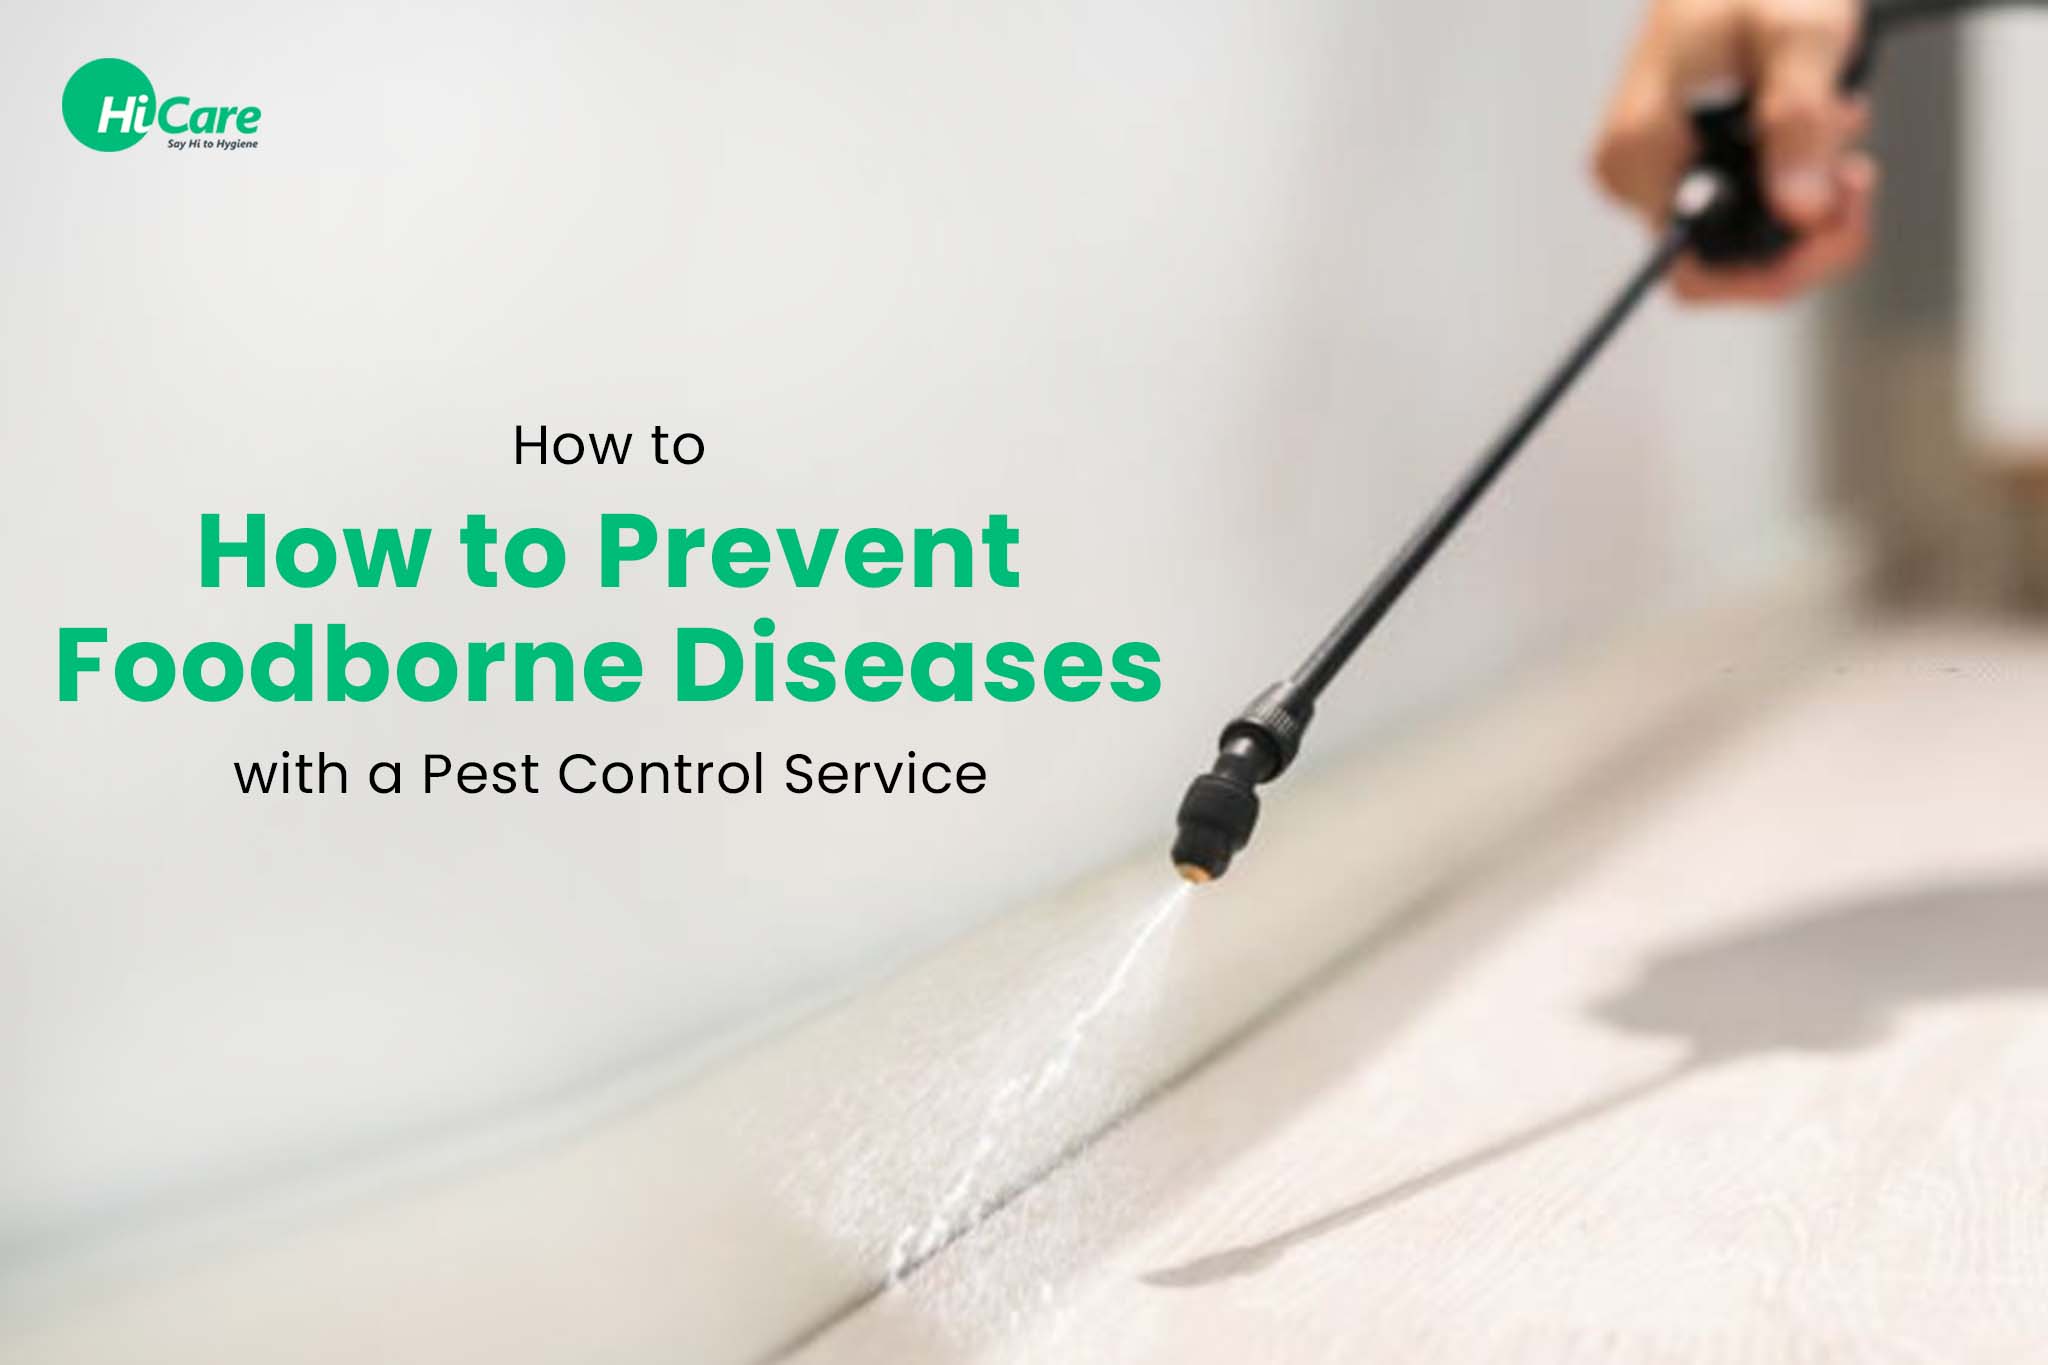 How to Prevent Food-borne Diseases with a Pest Control Service